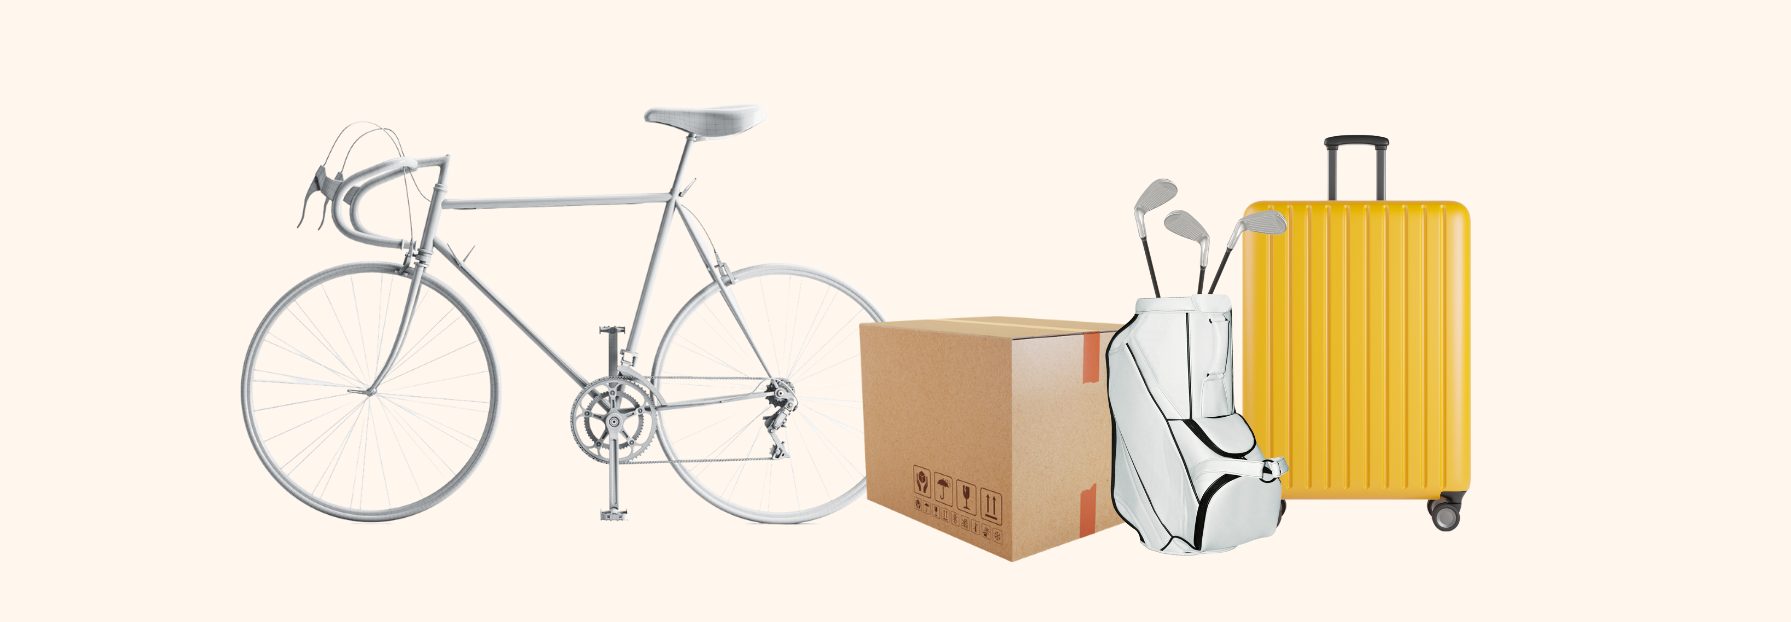 bike, box, gold clubs, and suitcase